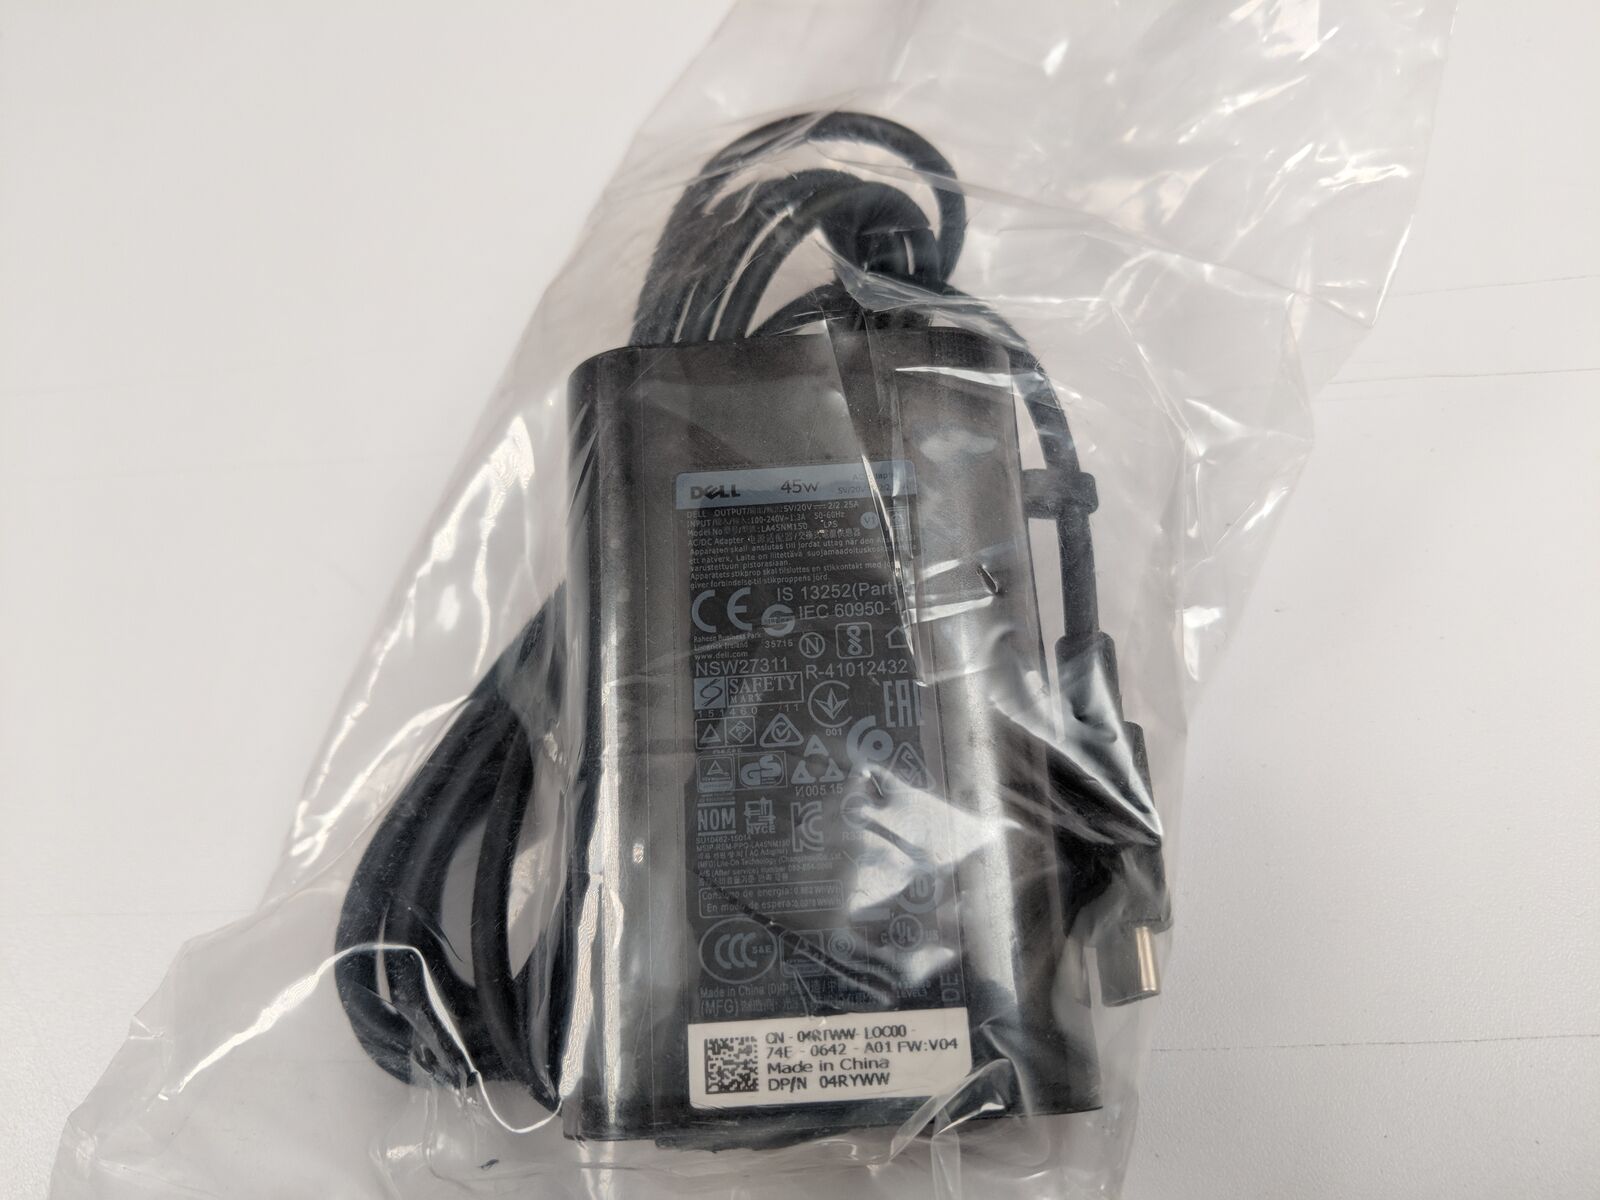 Dell 45W AC Adapter Charger USB-C Type C XPS 13 9365 9370 9380 9300 9310 MPN: LA45NM150 689C4 HDCY5 8XTW5 Brand: Dell